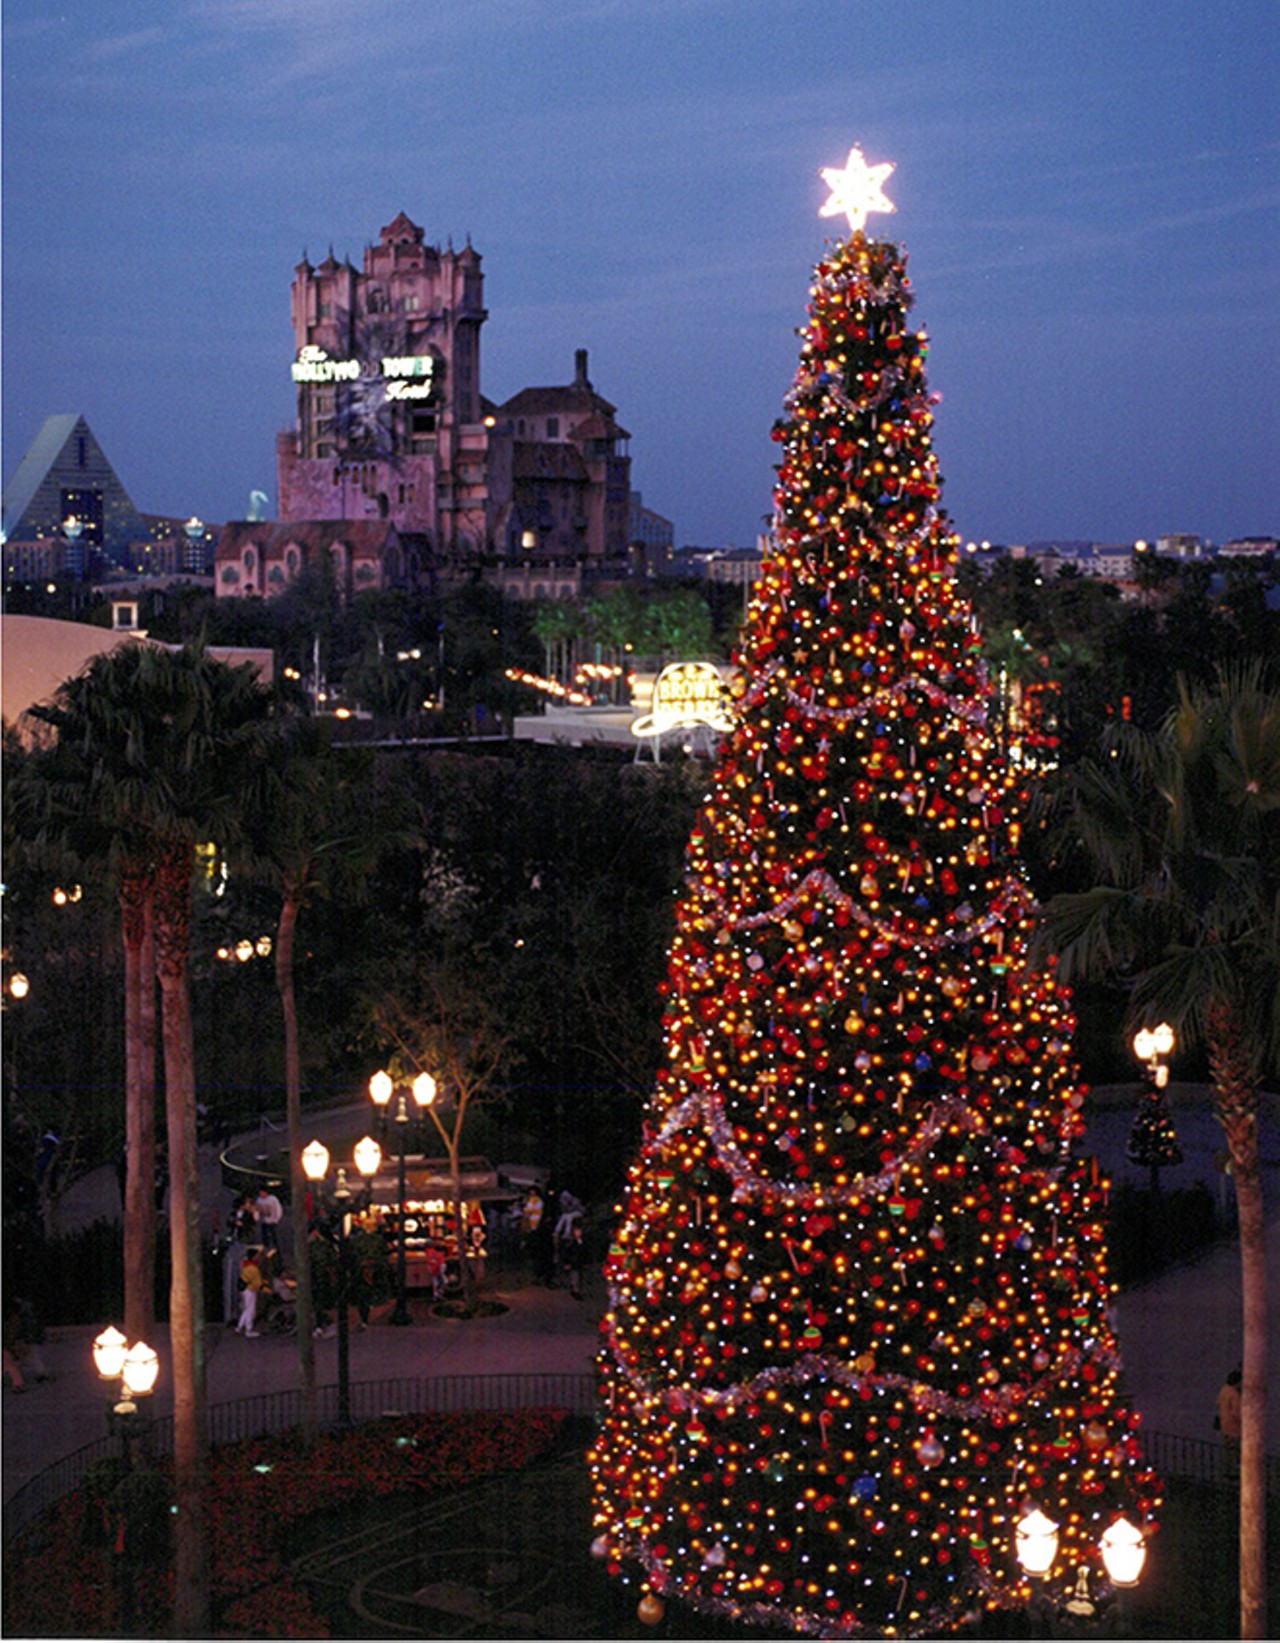 A 65-foot Christmas tree with more than 5,000 lights at Disney-MGM Studios. 1996.